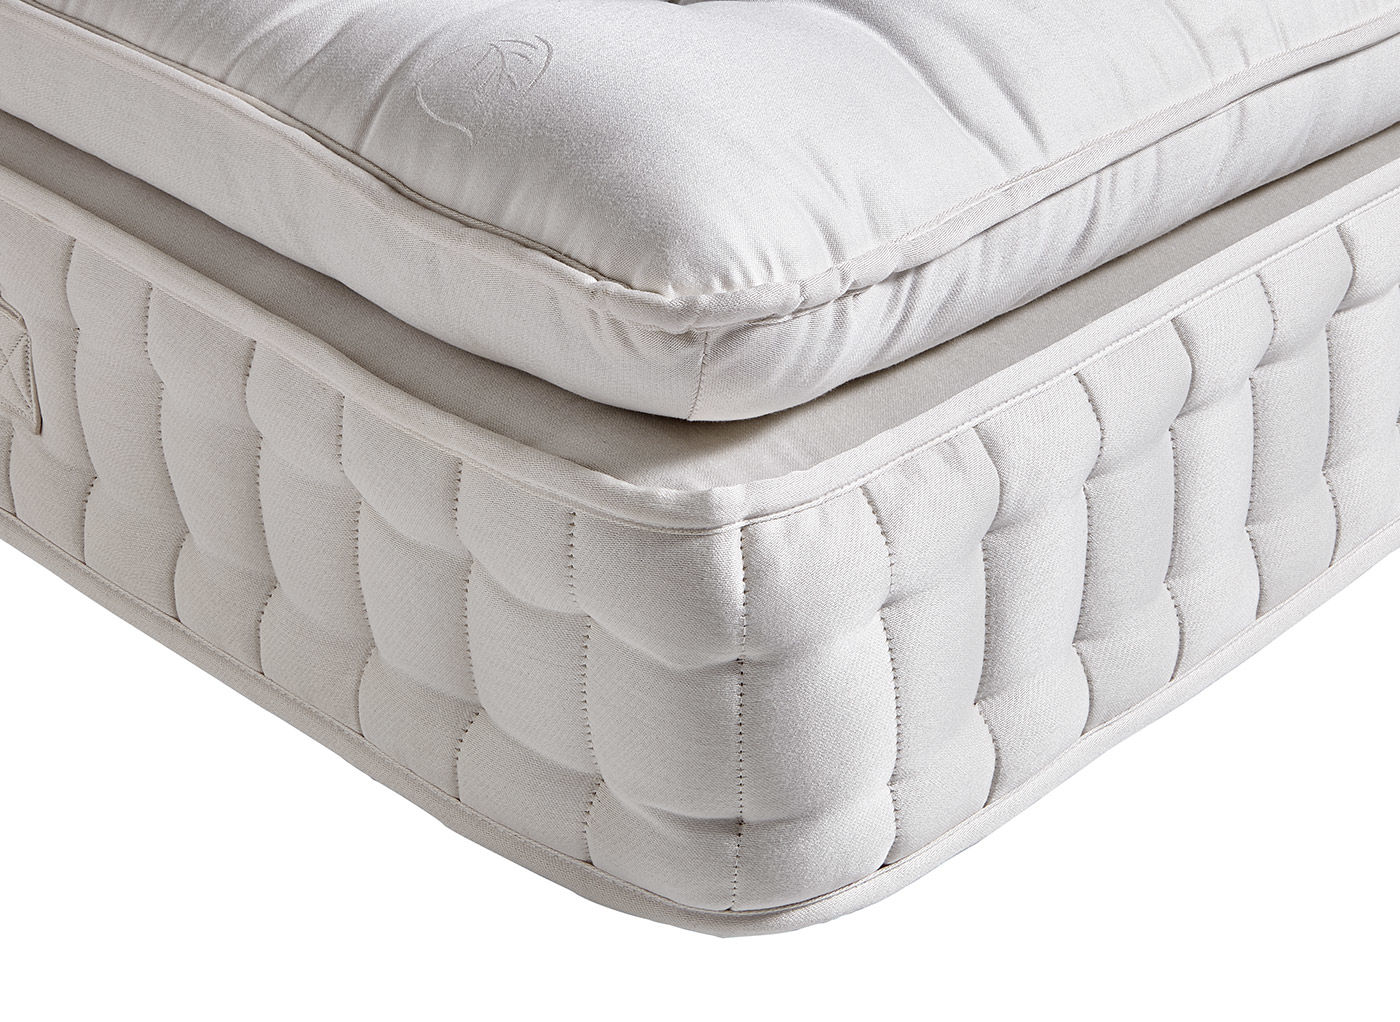 flaxby mattress 6500 review